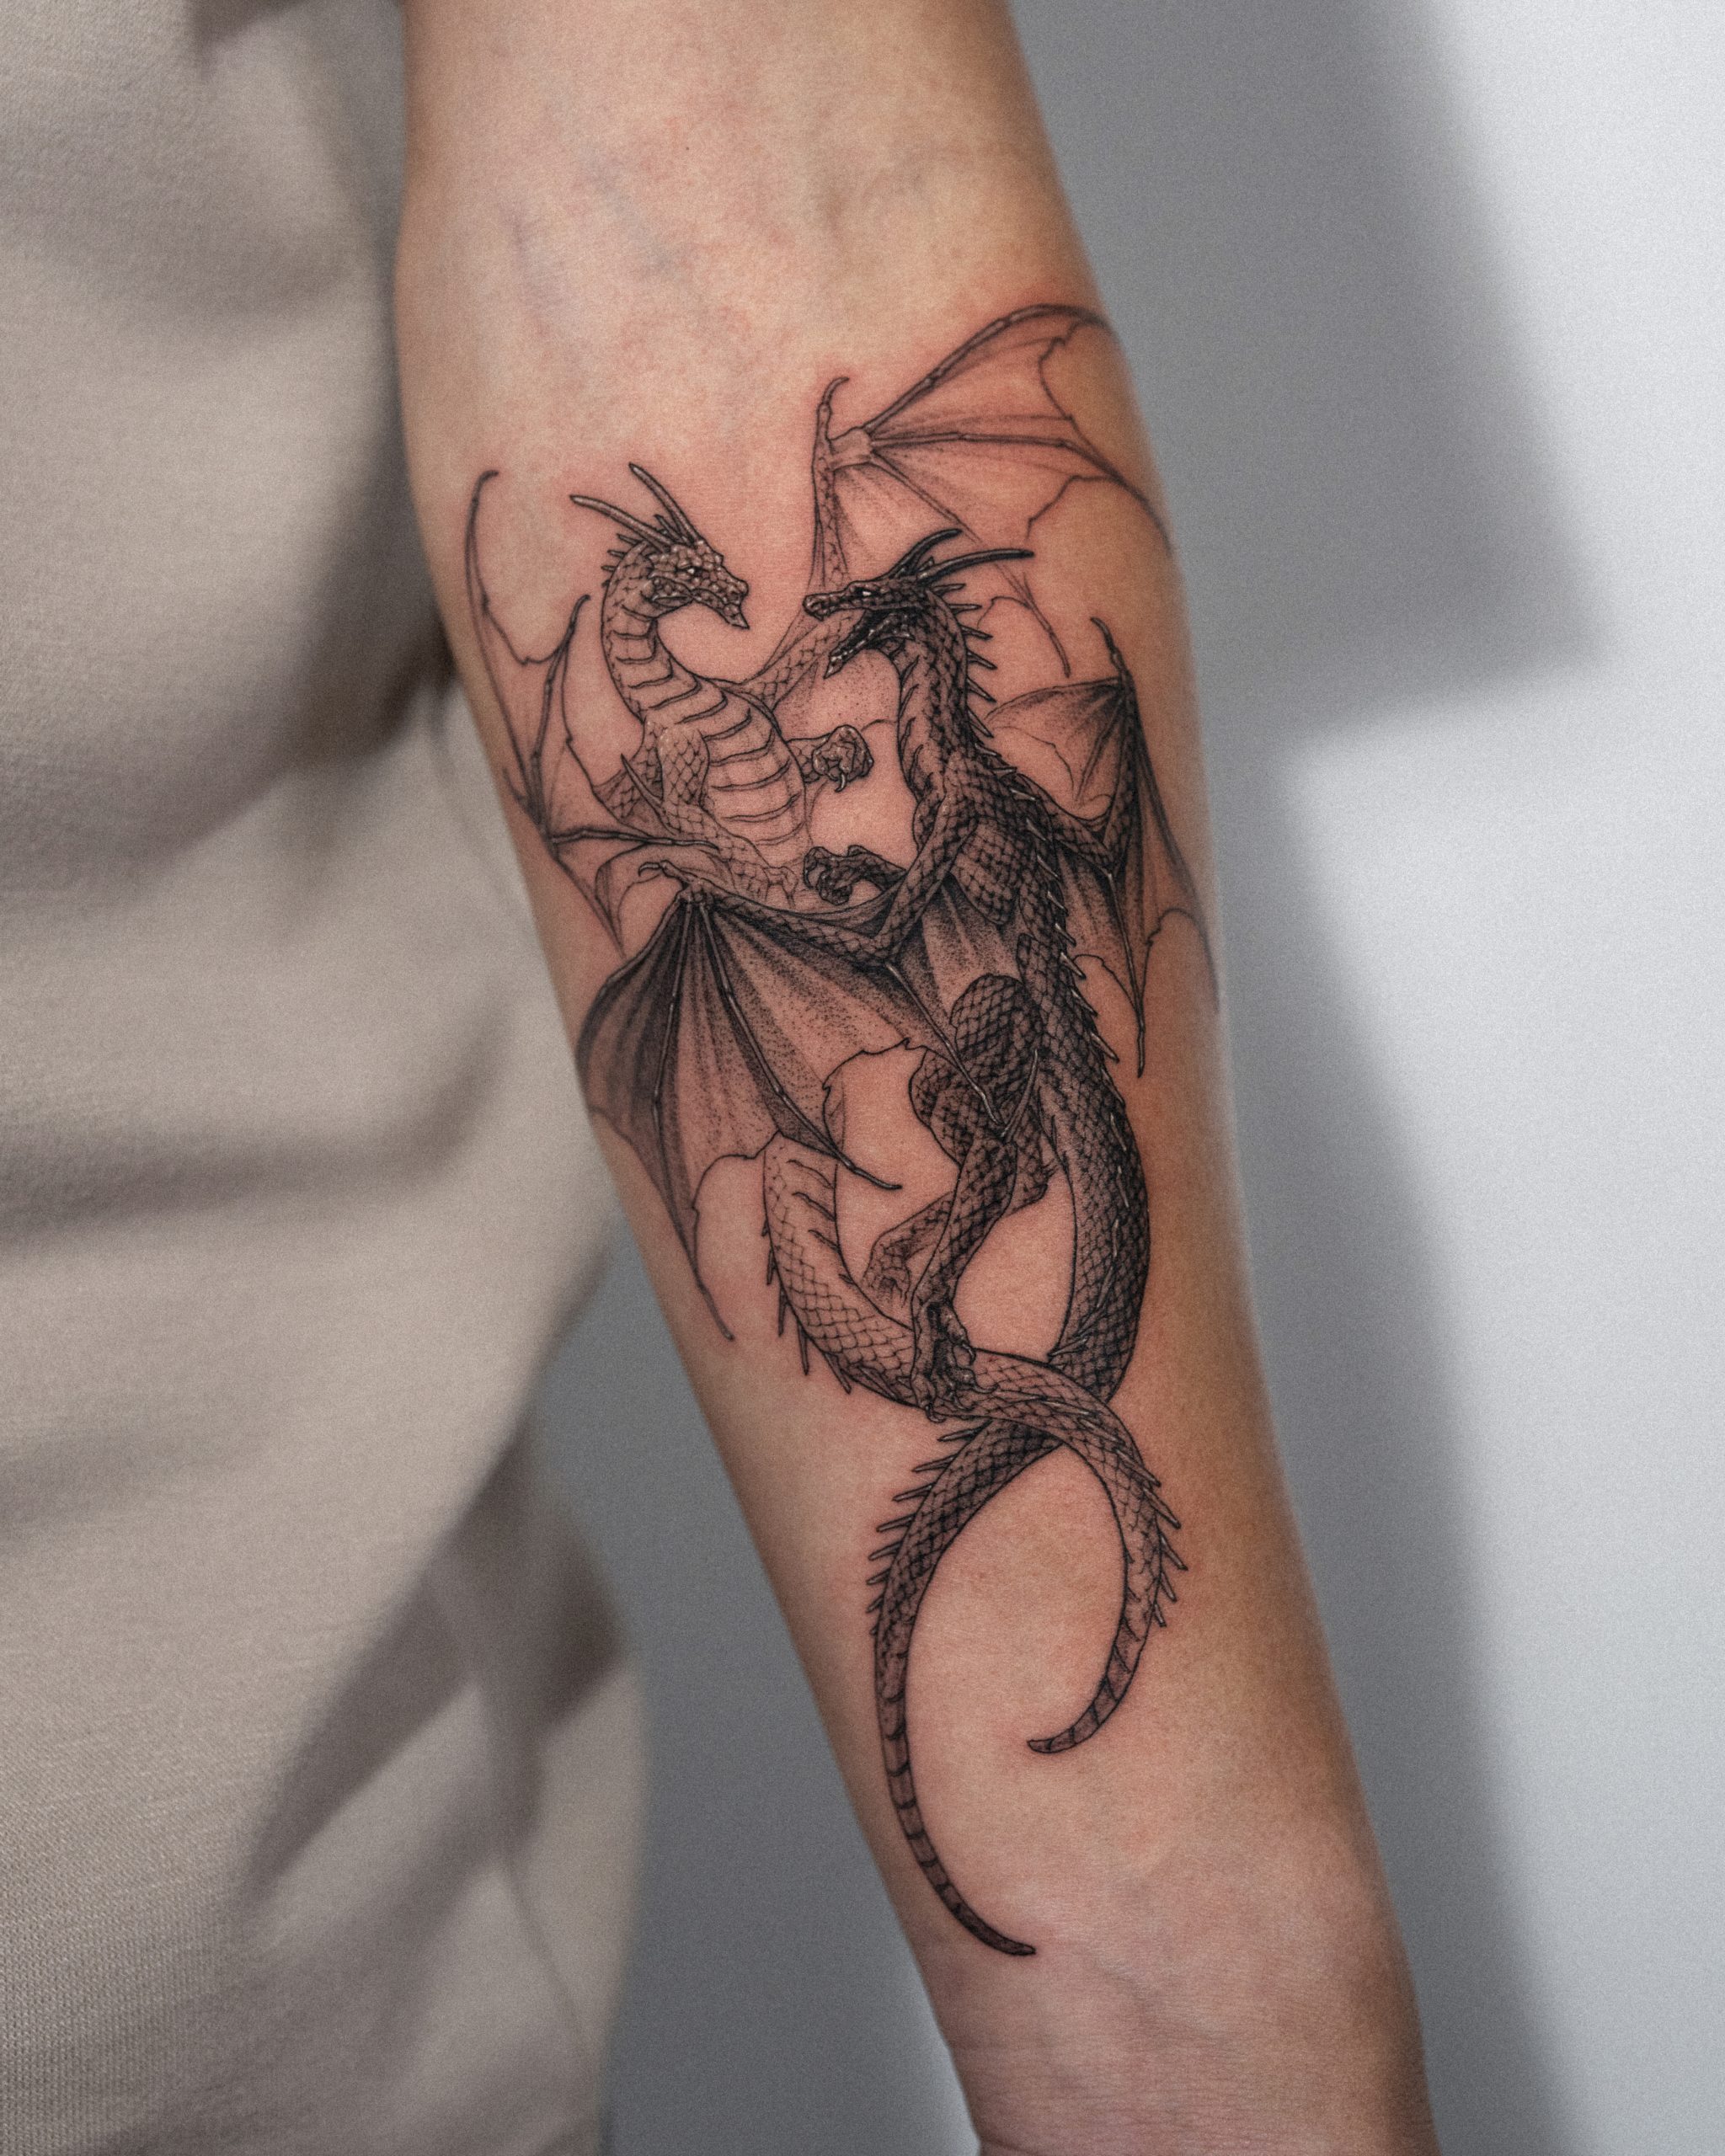 Pin by MsNimbis on Inked Dreams | Toothless, Toothless dragon tattoo, Dragon  light